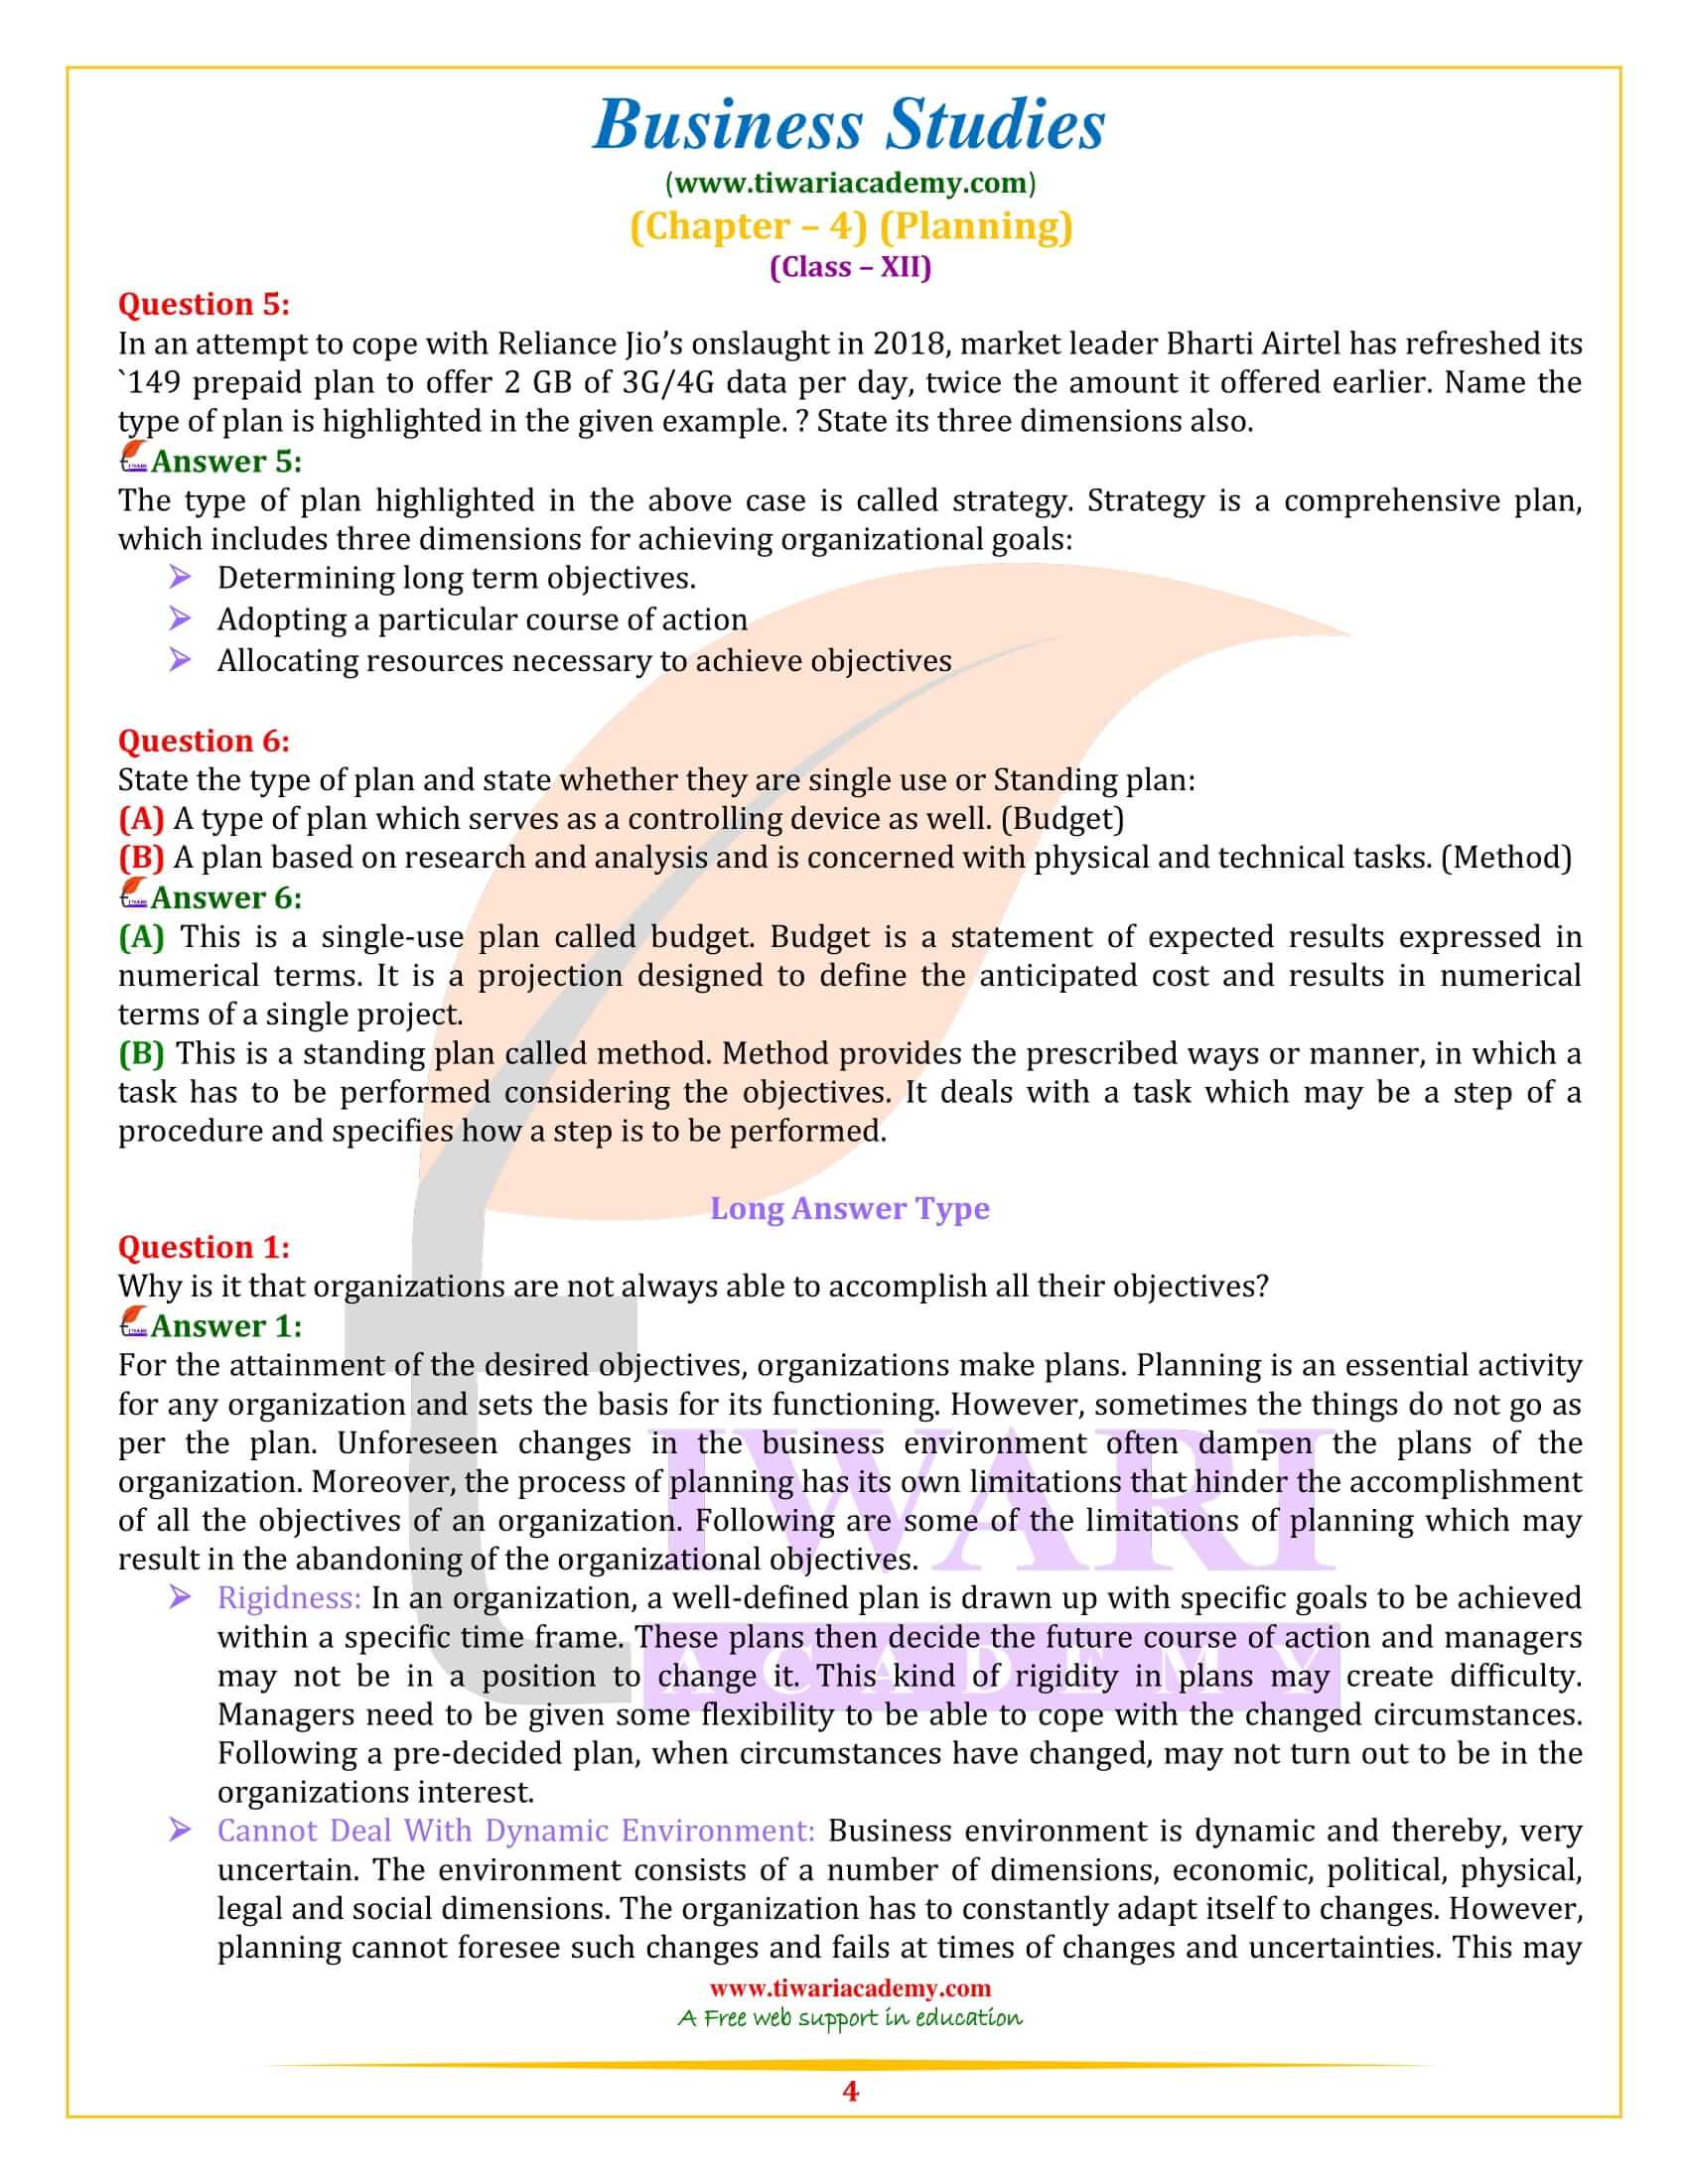 NCERT Solutions for Class 12 Business Studies Chapter 4 in PDF